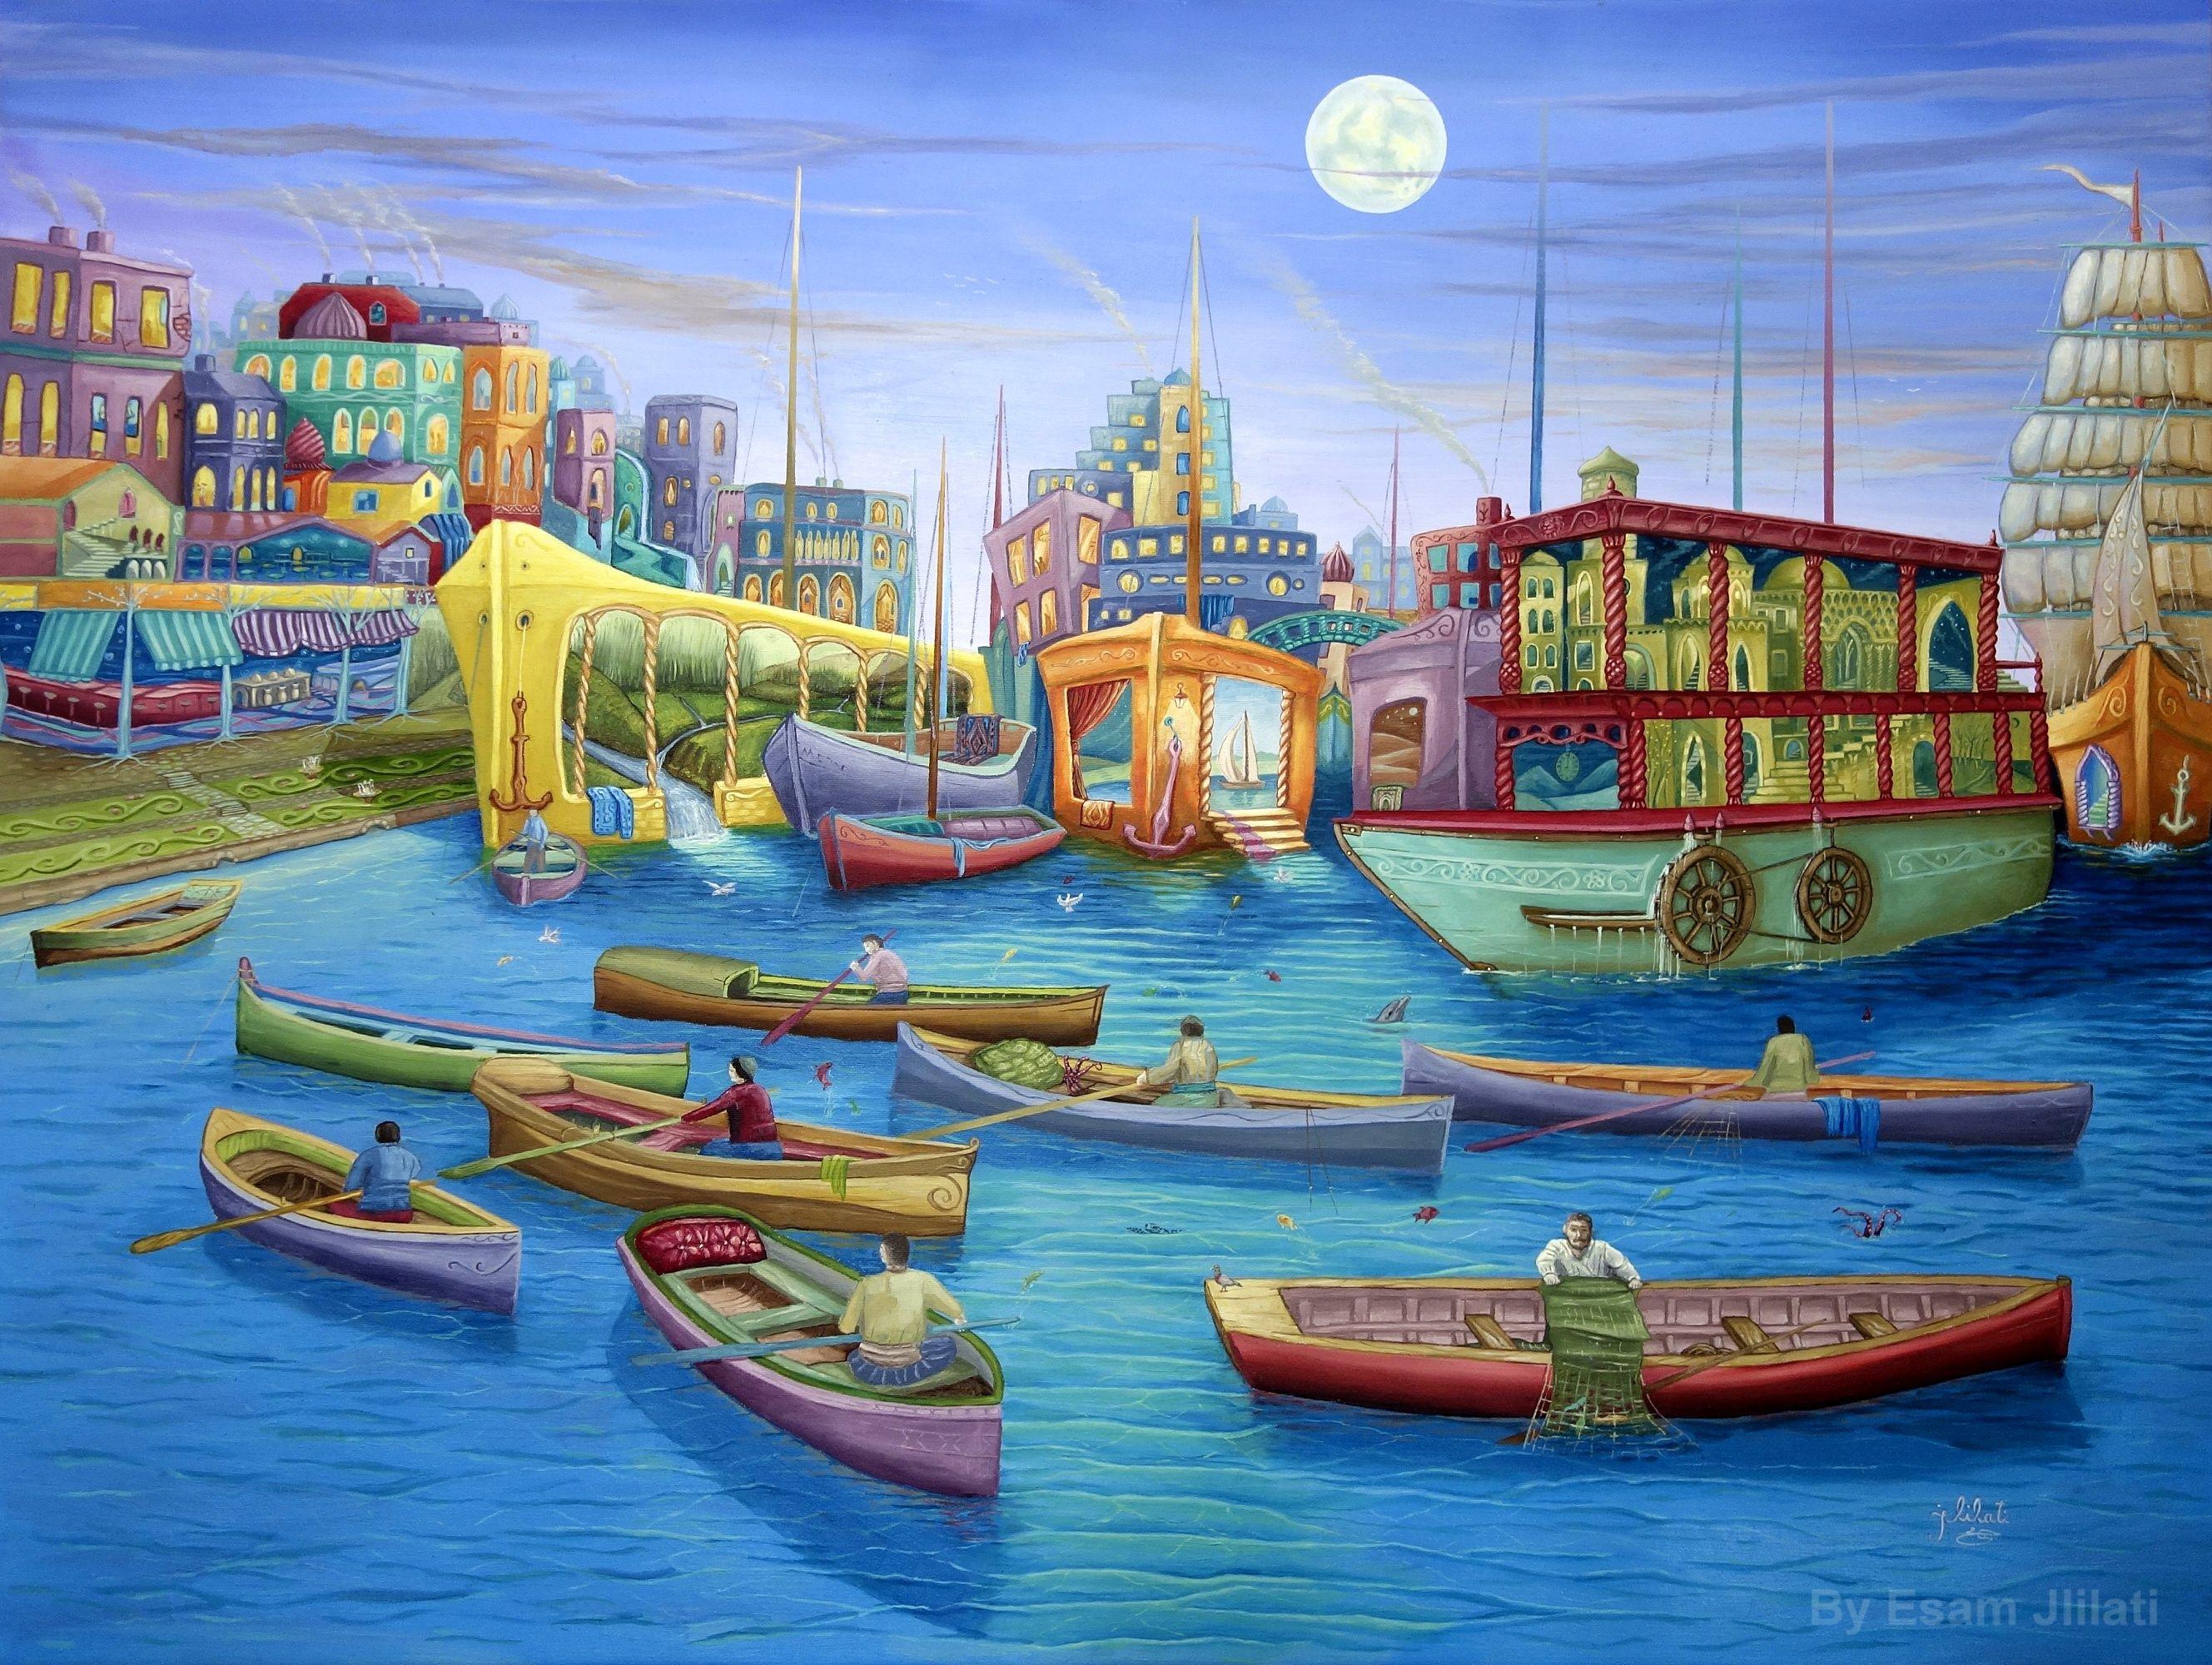 The Painting title: Radiance Port  Medium: oil color on canvas   Size: 40""x30"" = 102cm x 77cm    Subject: Mixture of memories and dreams in Jlilati’s style (colorful surrealism architectural style)     

:: Painting :: Surrealism :: This piece